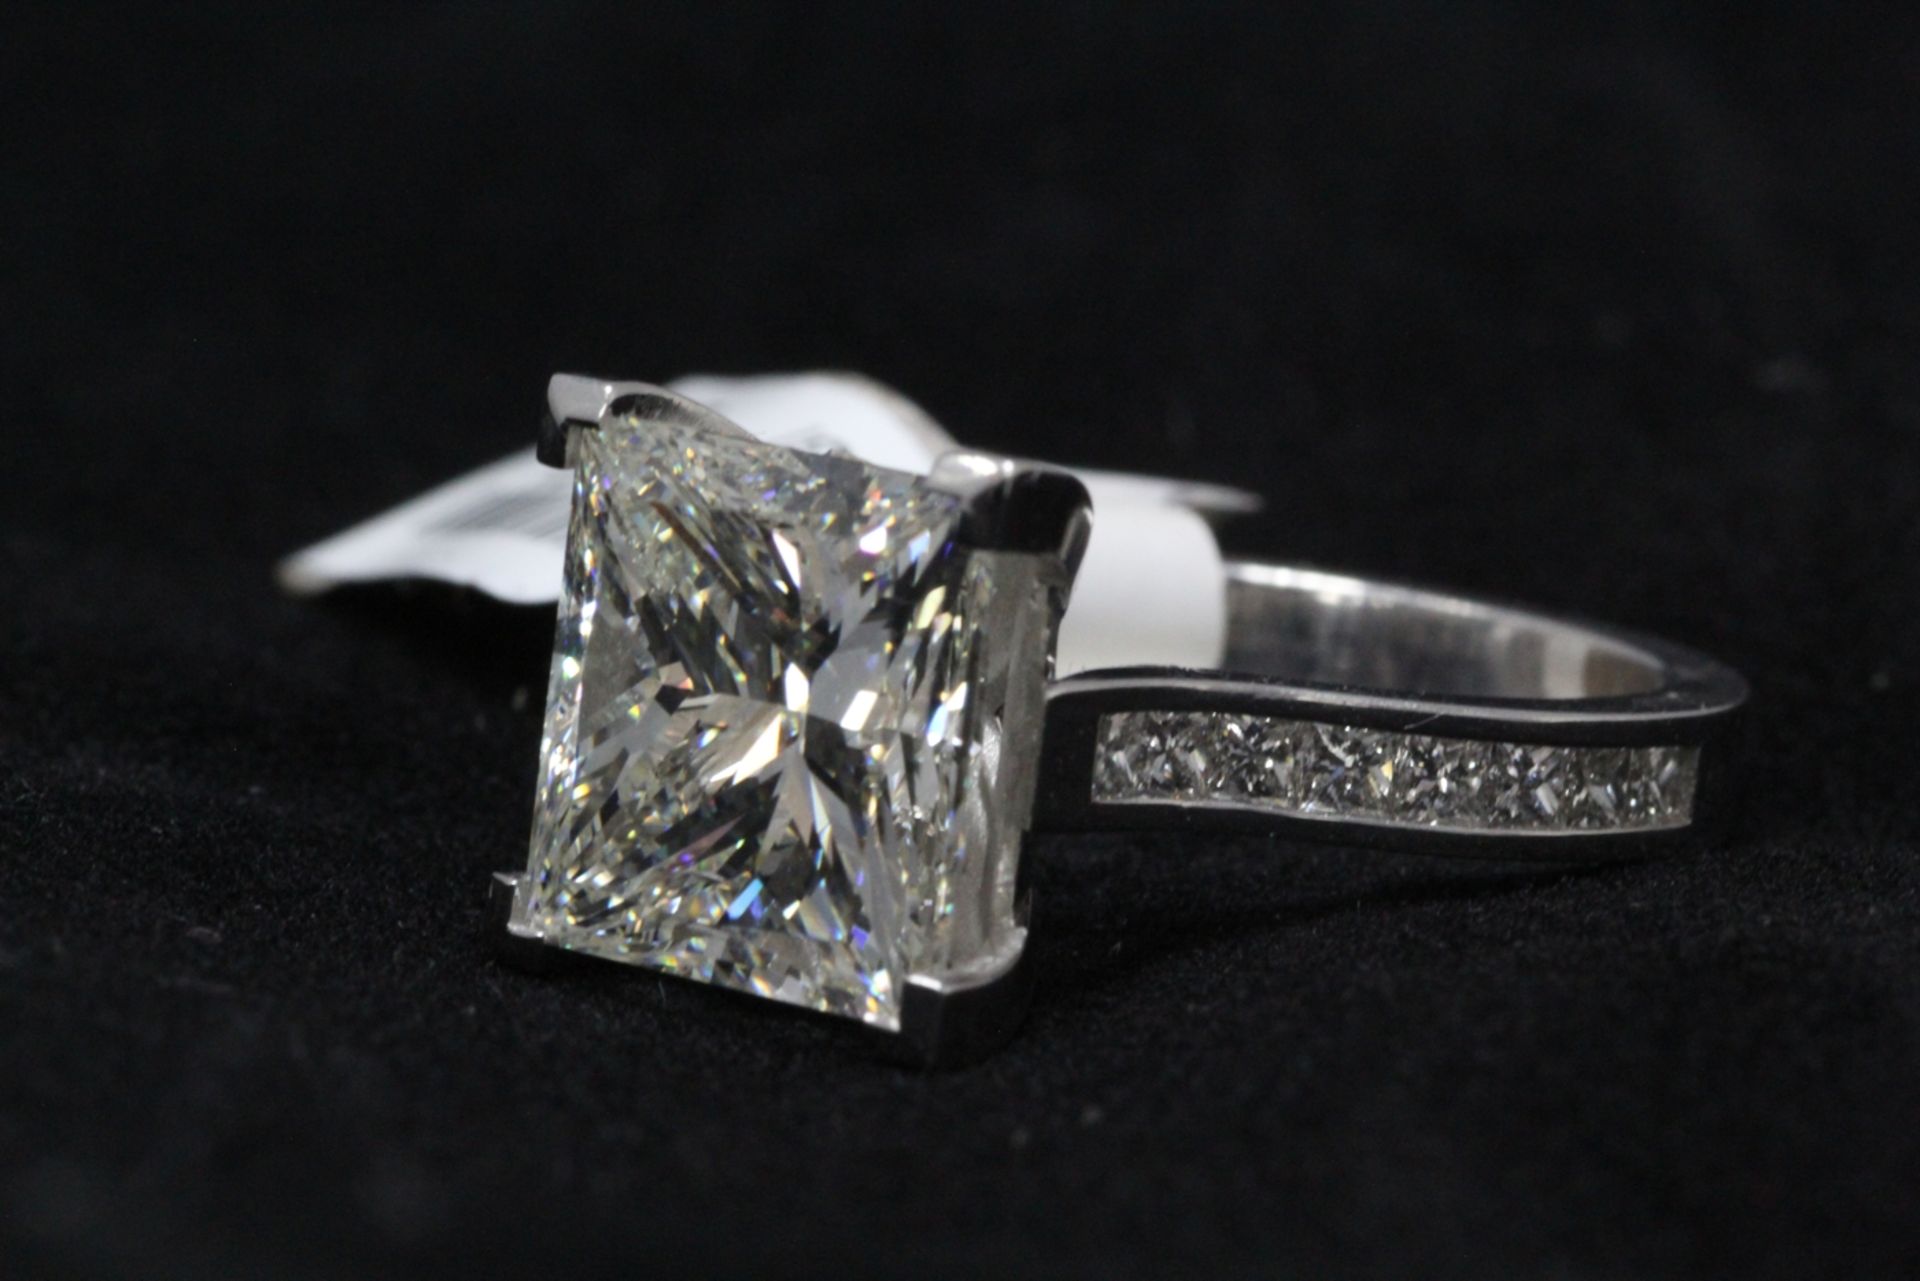 18ct White Gold Single Stone, Princess Cut With Stone Set Shoulders Diamond Ring 7.01 Carats - Image 2 of 2